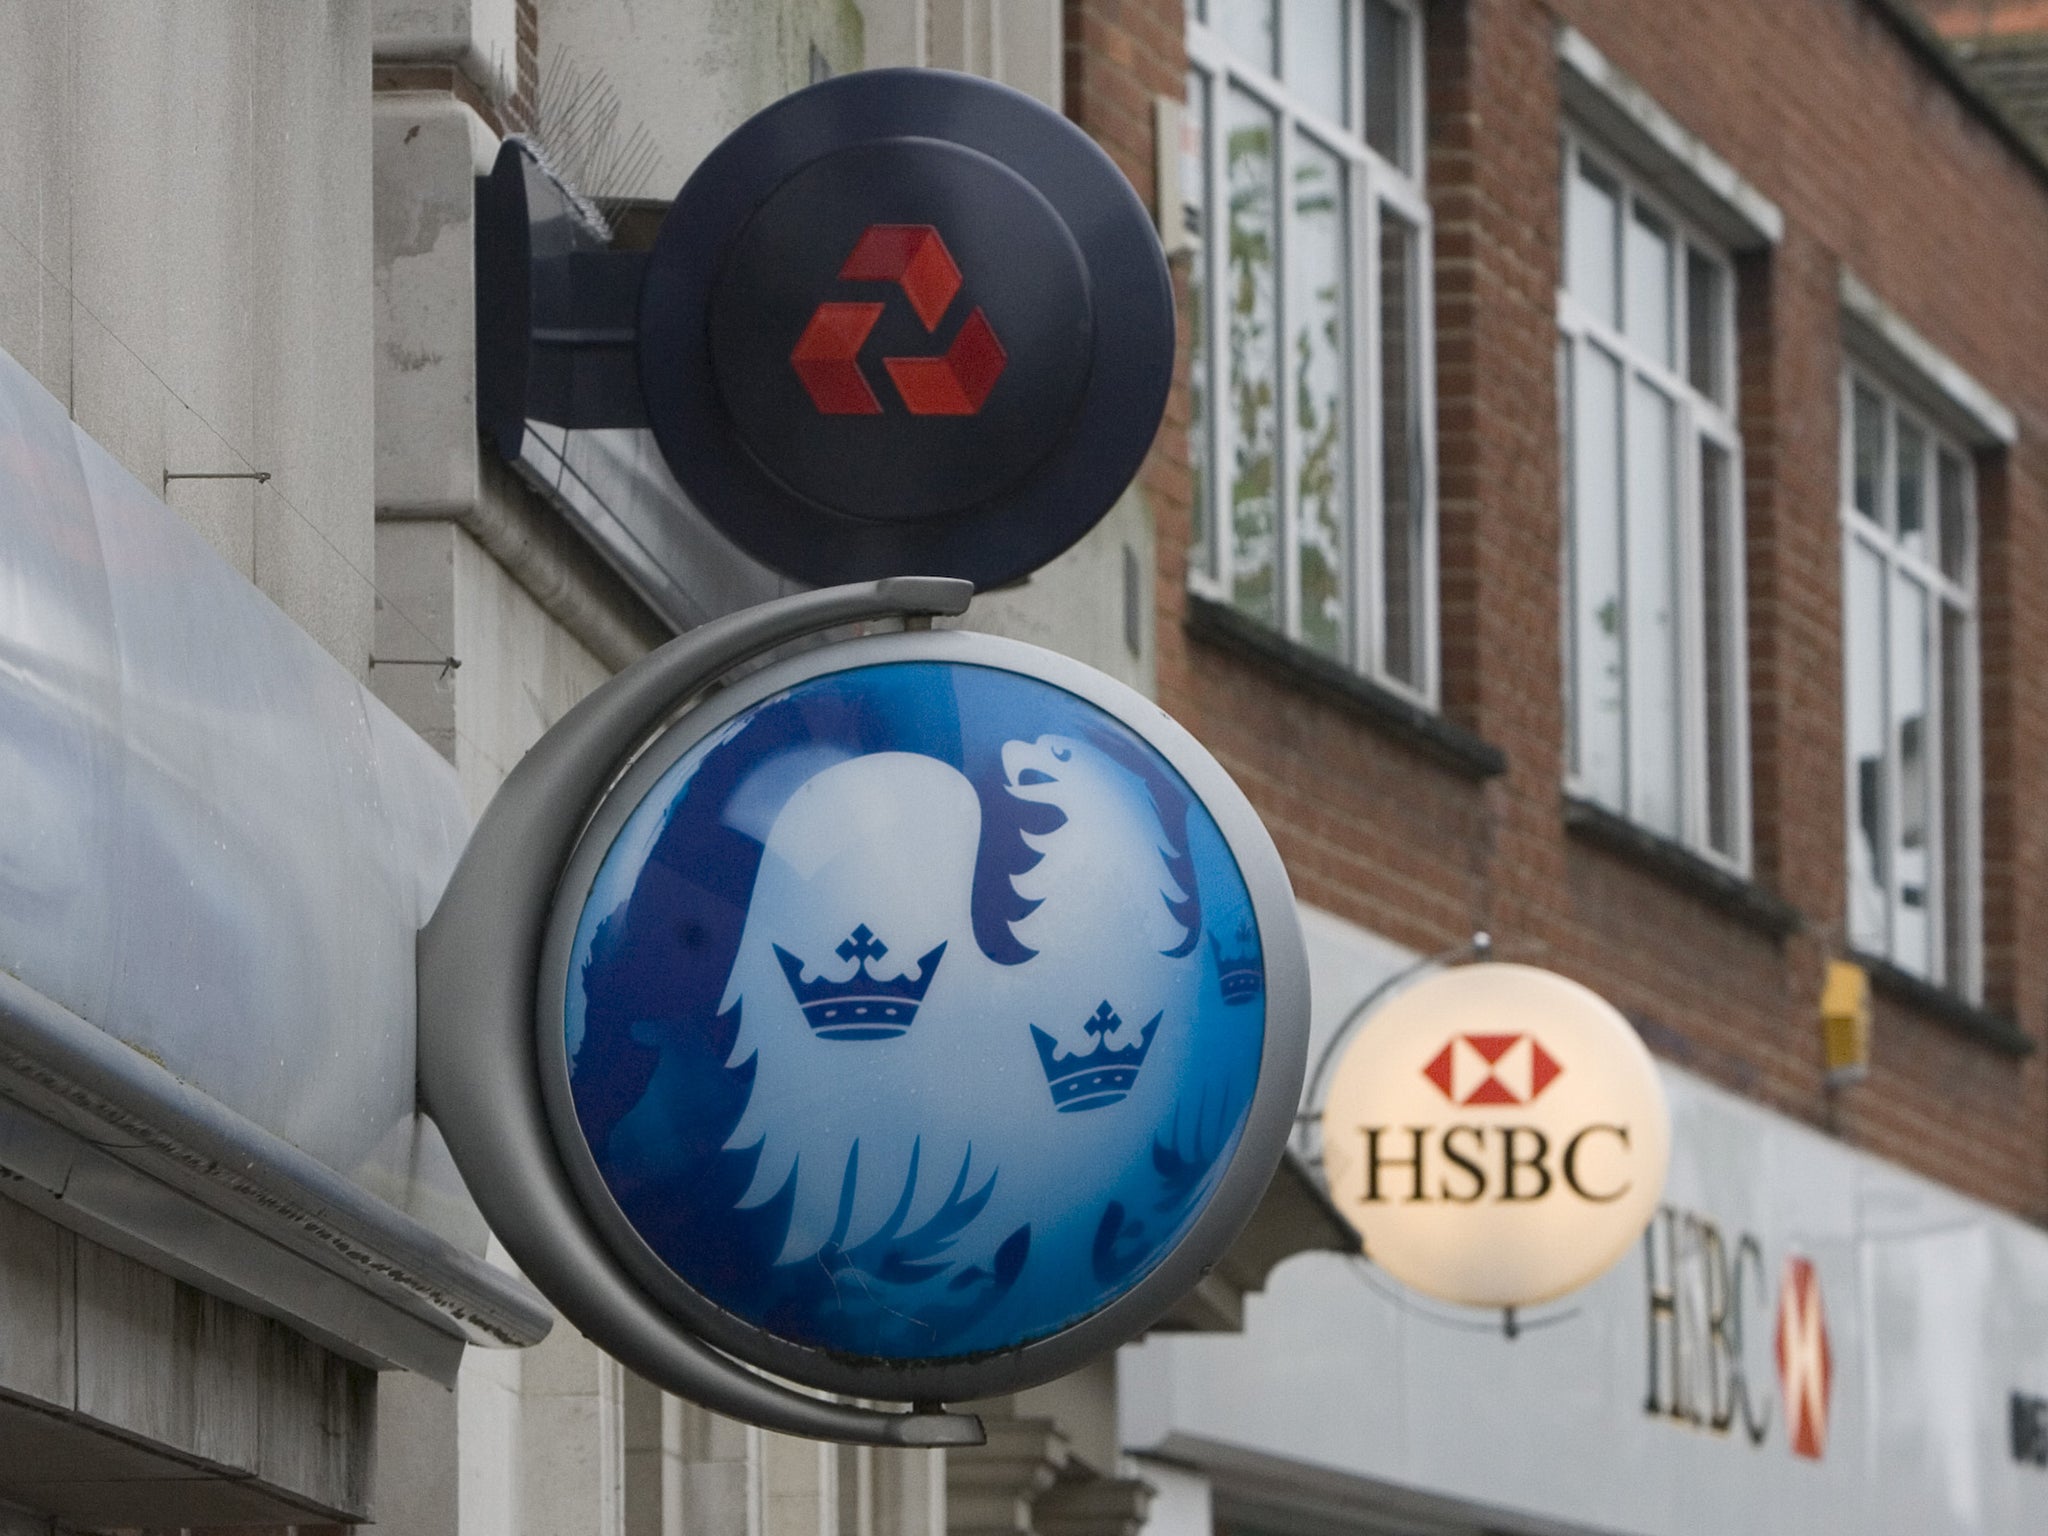 Watch out for the banks' marketing gimmicks